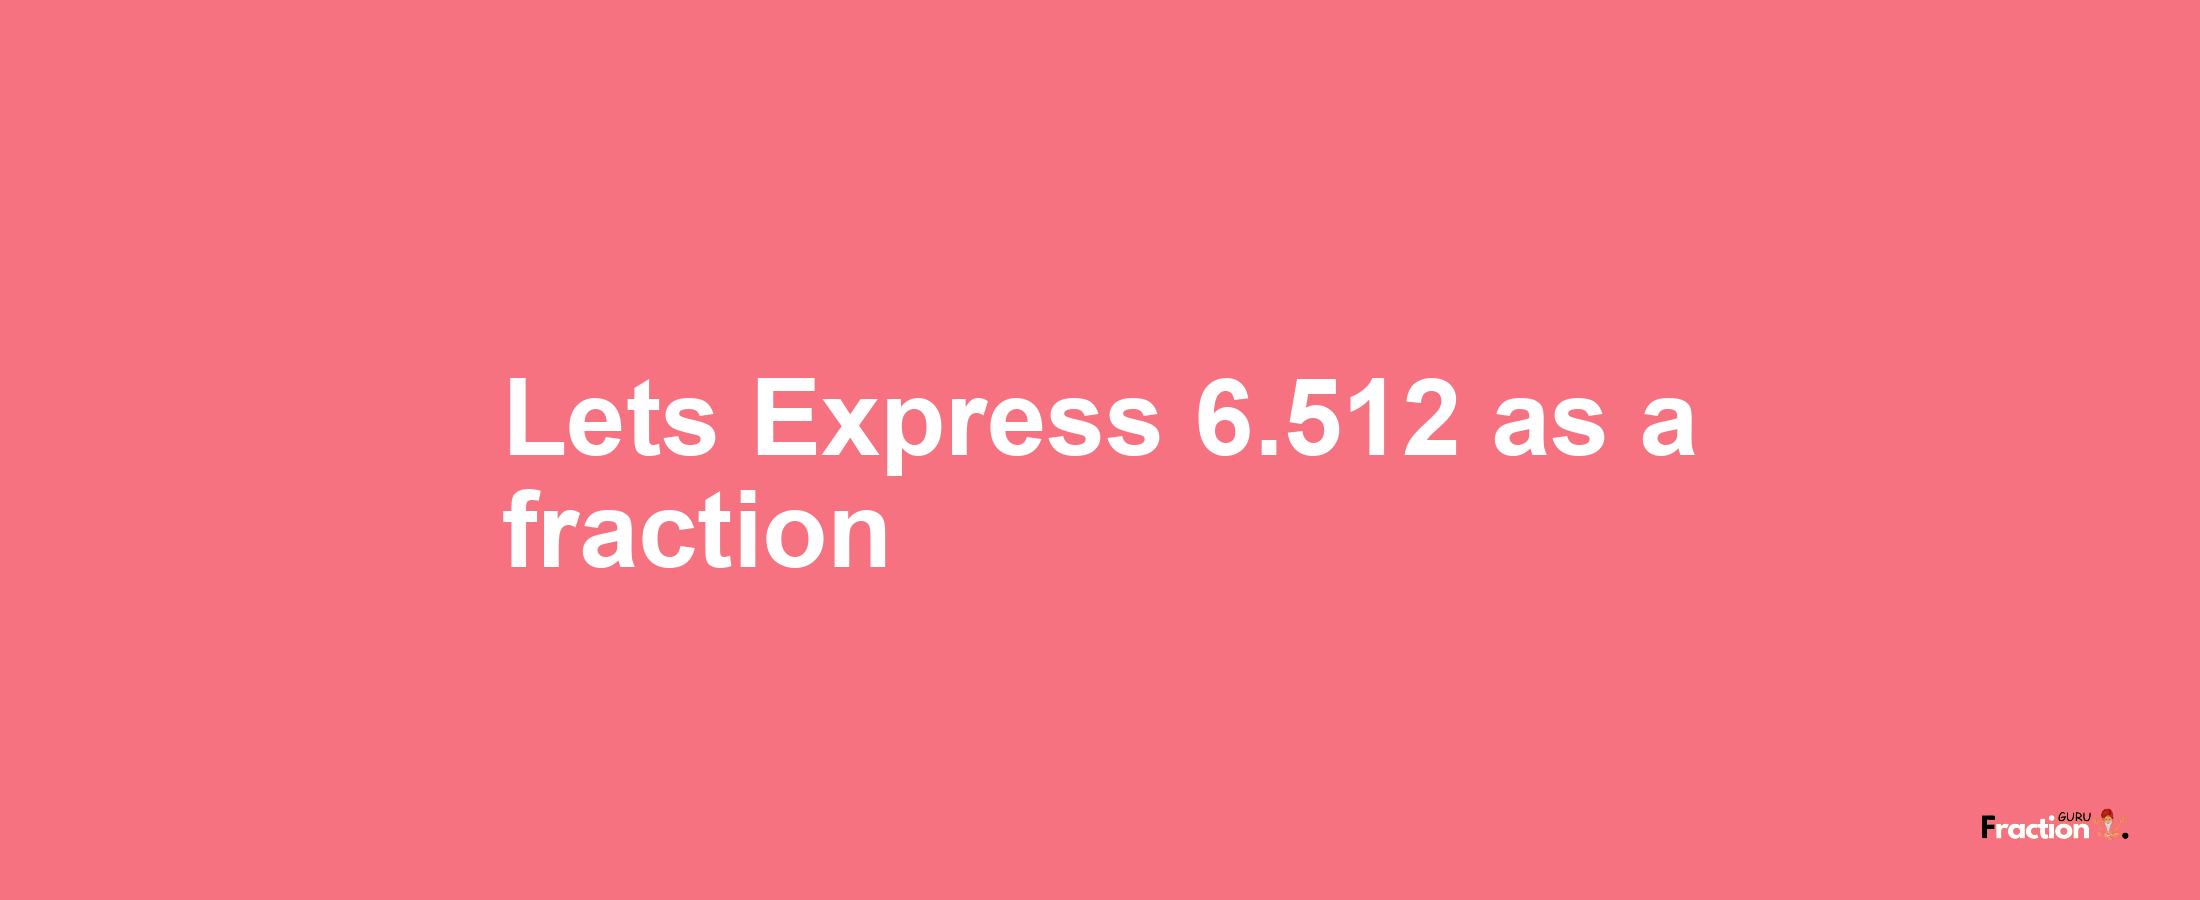 Lets Express 6.512 as afraction